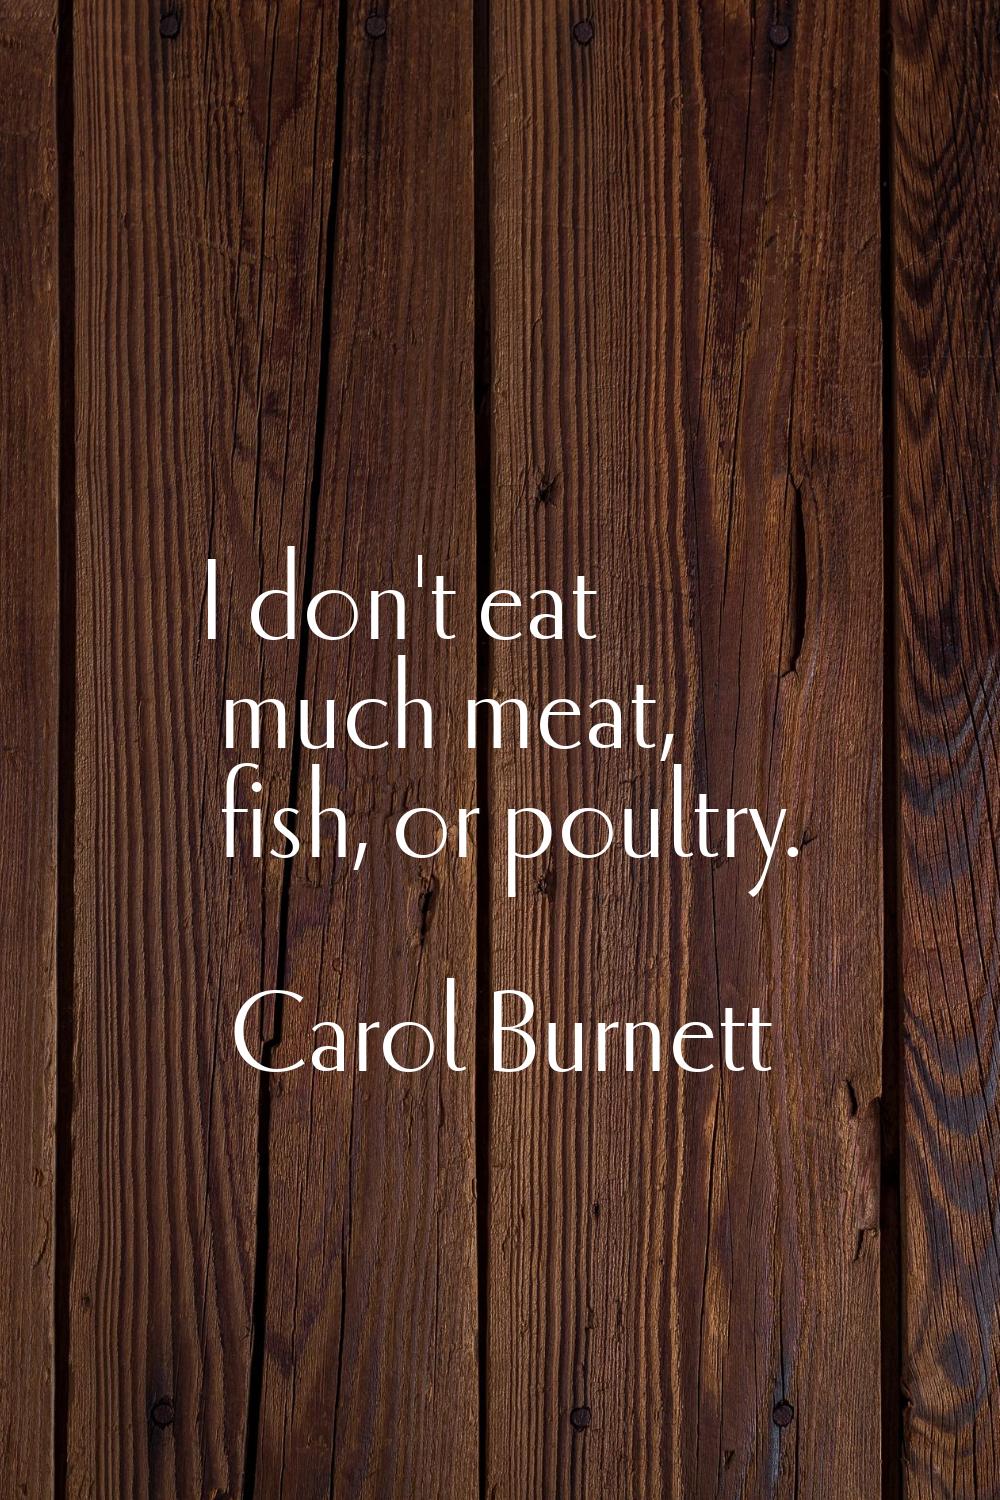 I don't eat much meat, fish, or poultry.